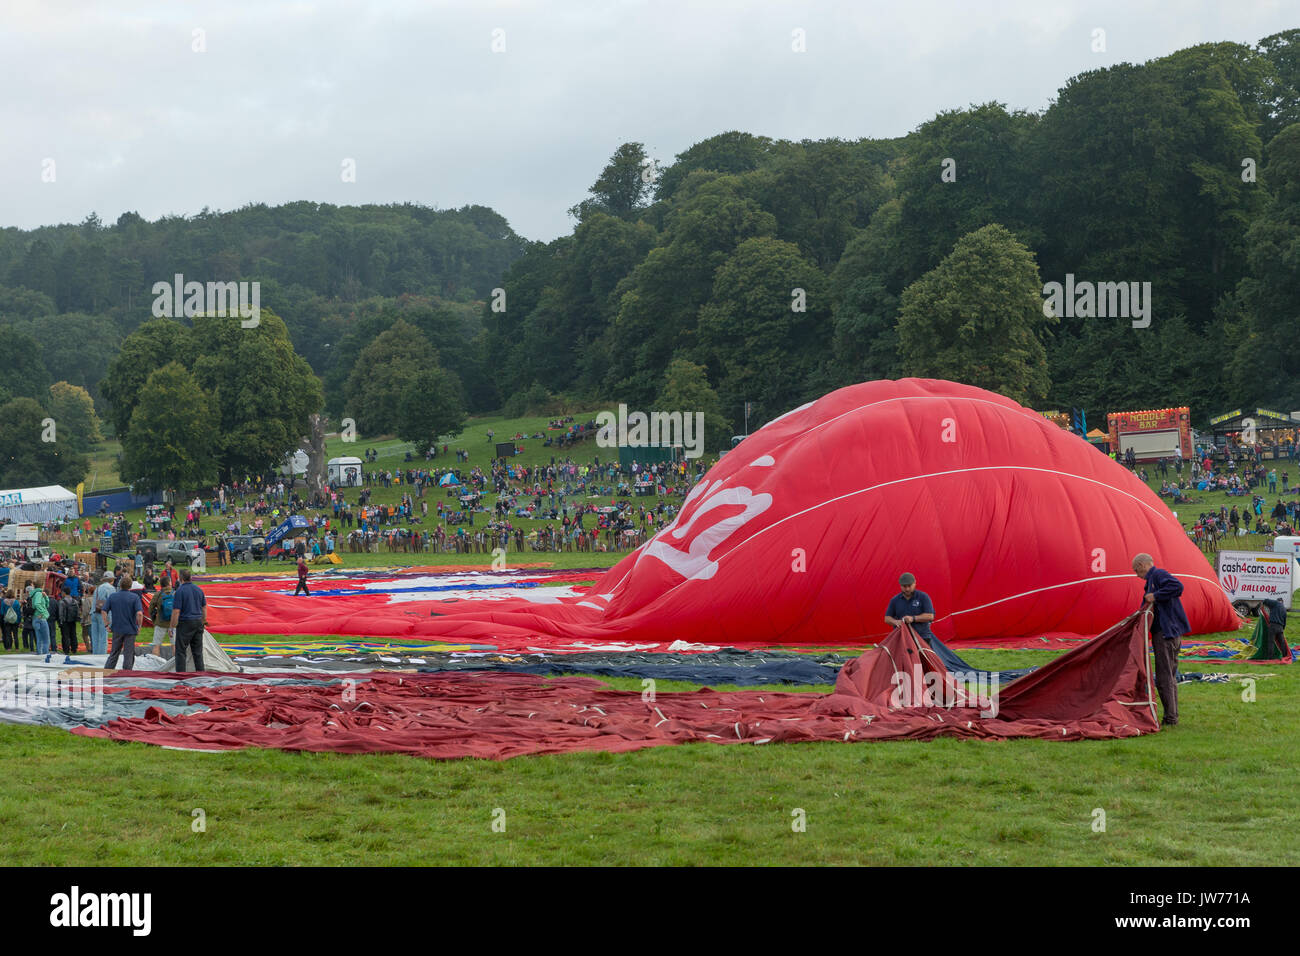 Ashton Court, Bristol, UK. 12 August 2017.  After the disappointing rain on Friday evening, the weather improves to allow 28 hot air balloons to fly over Bristol before the launch was curtailed due to worsening weather conditions. The third planned ascent at this year’s Bristol International Balloon Fiesta was in front of a large crowds at Ashton Court, Bristol. Stock Photo